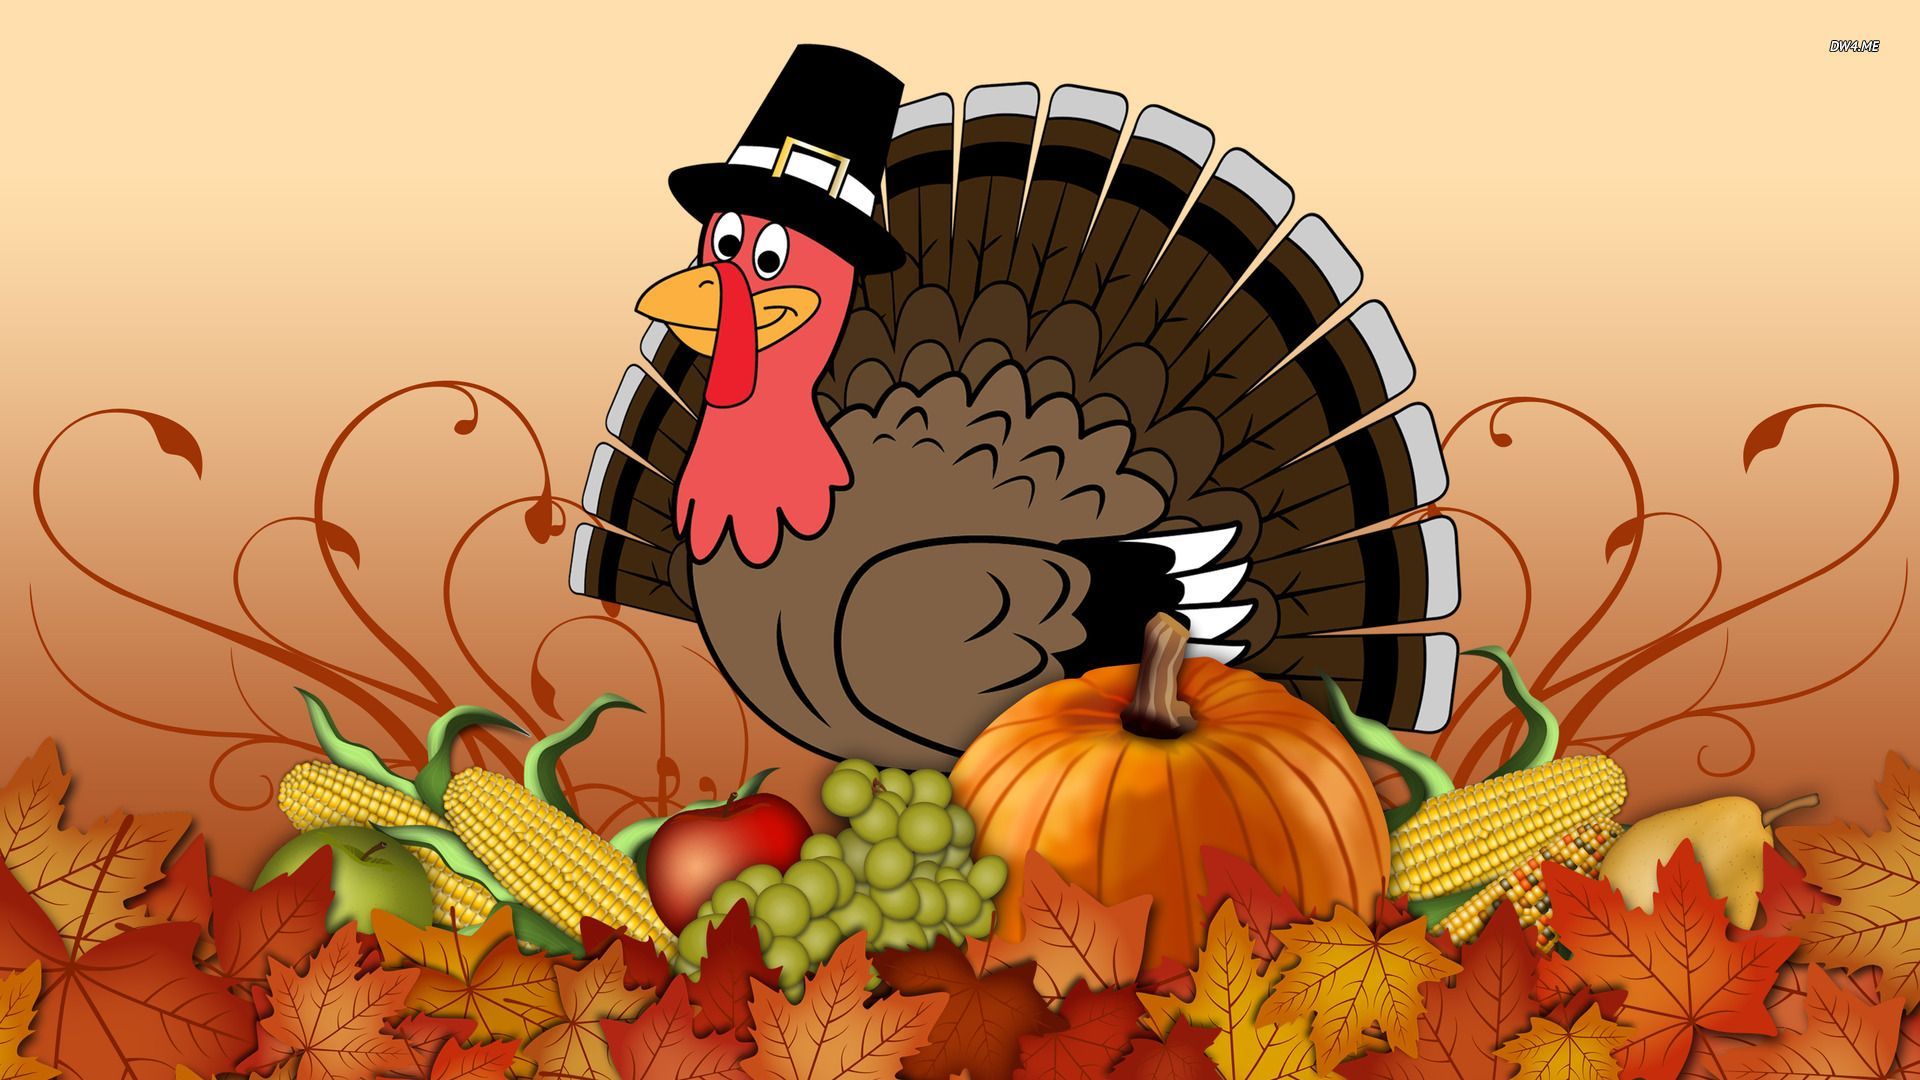 Free Thanksgiving Background Wallpaper For Desktop. Happy thanksgiving wallpaper, Free thanksgiving wallpaper, Thanksgiving background